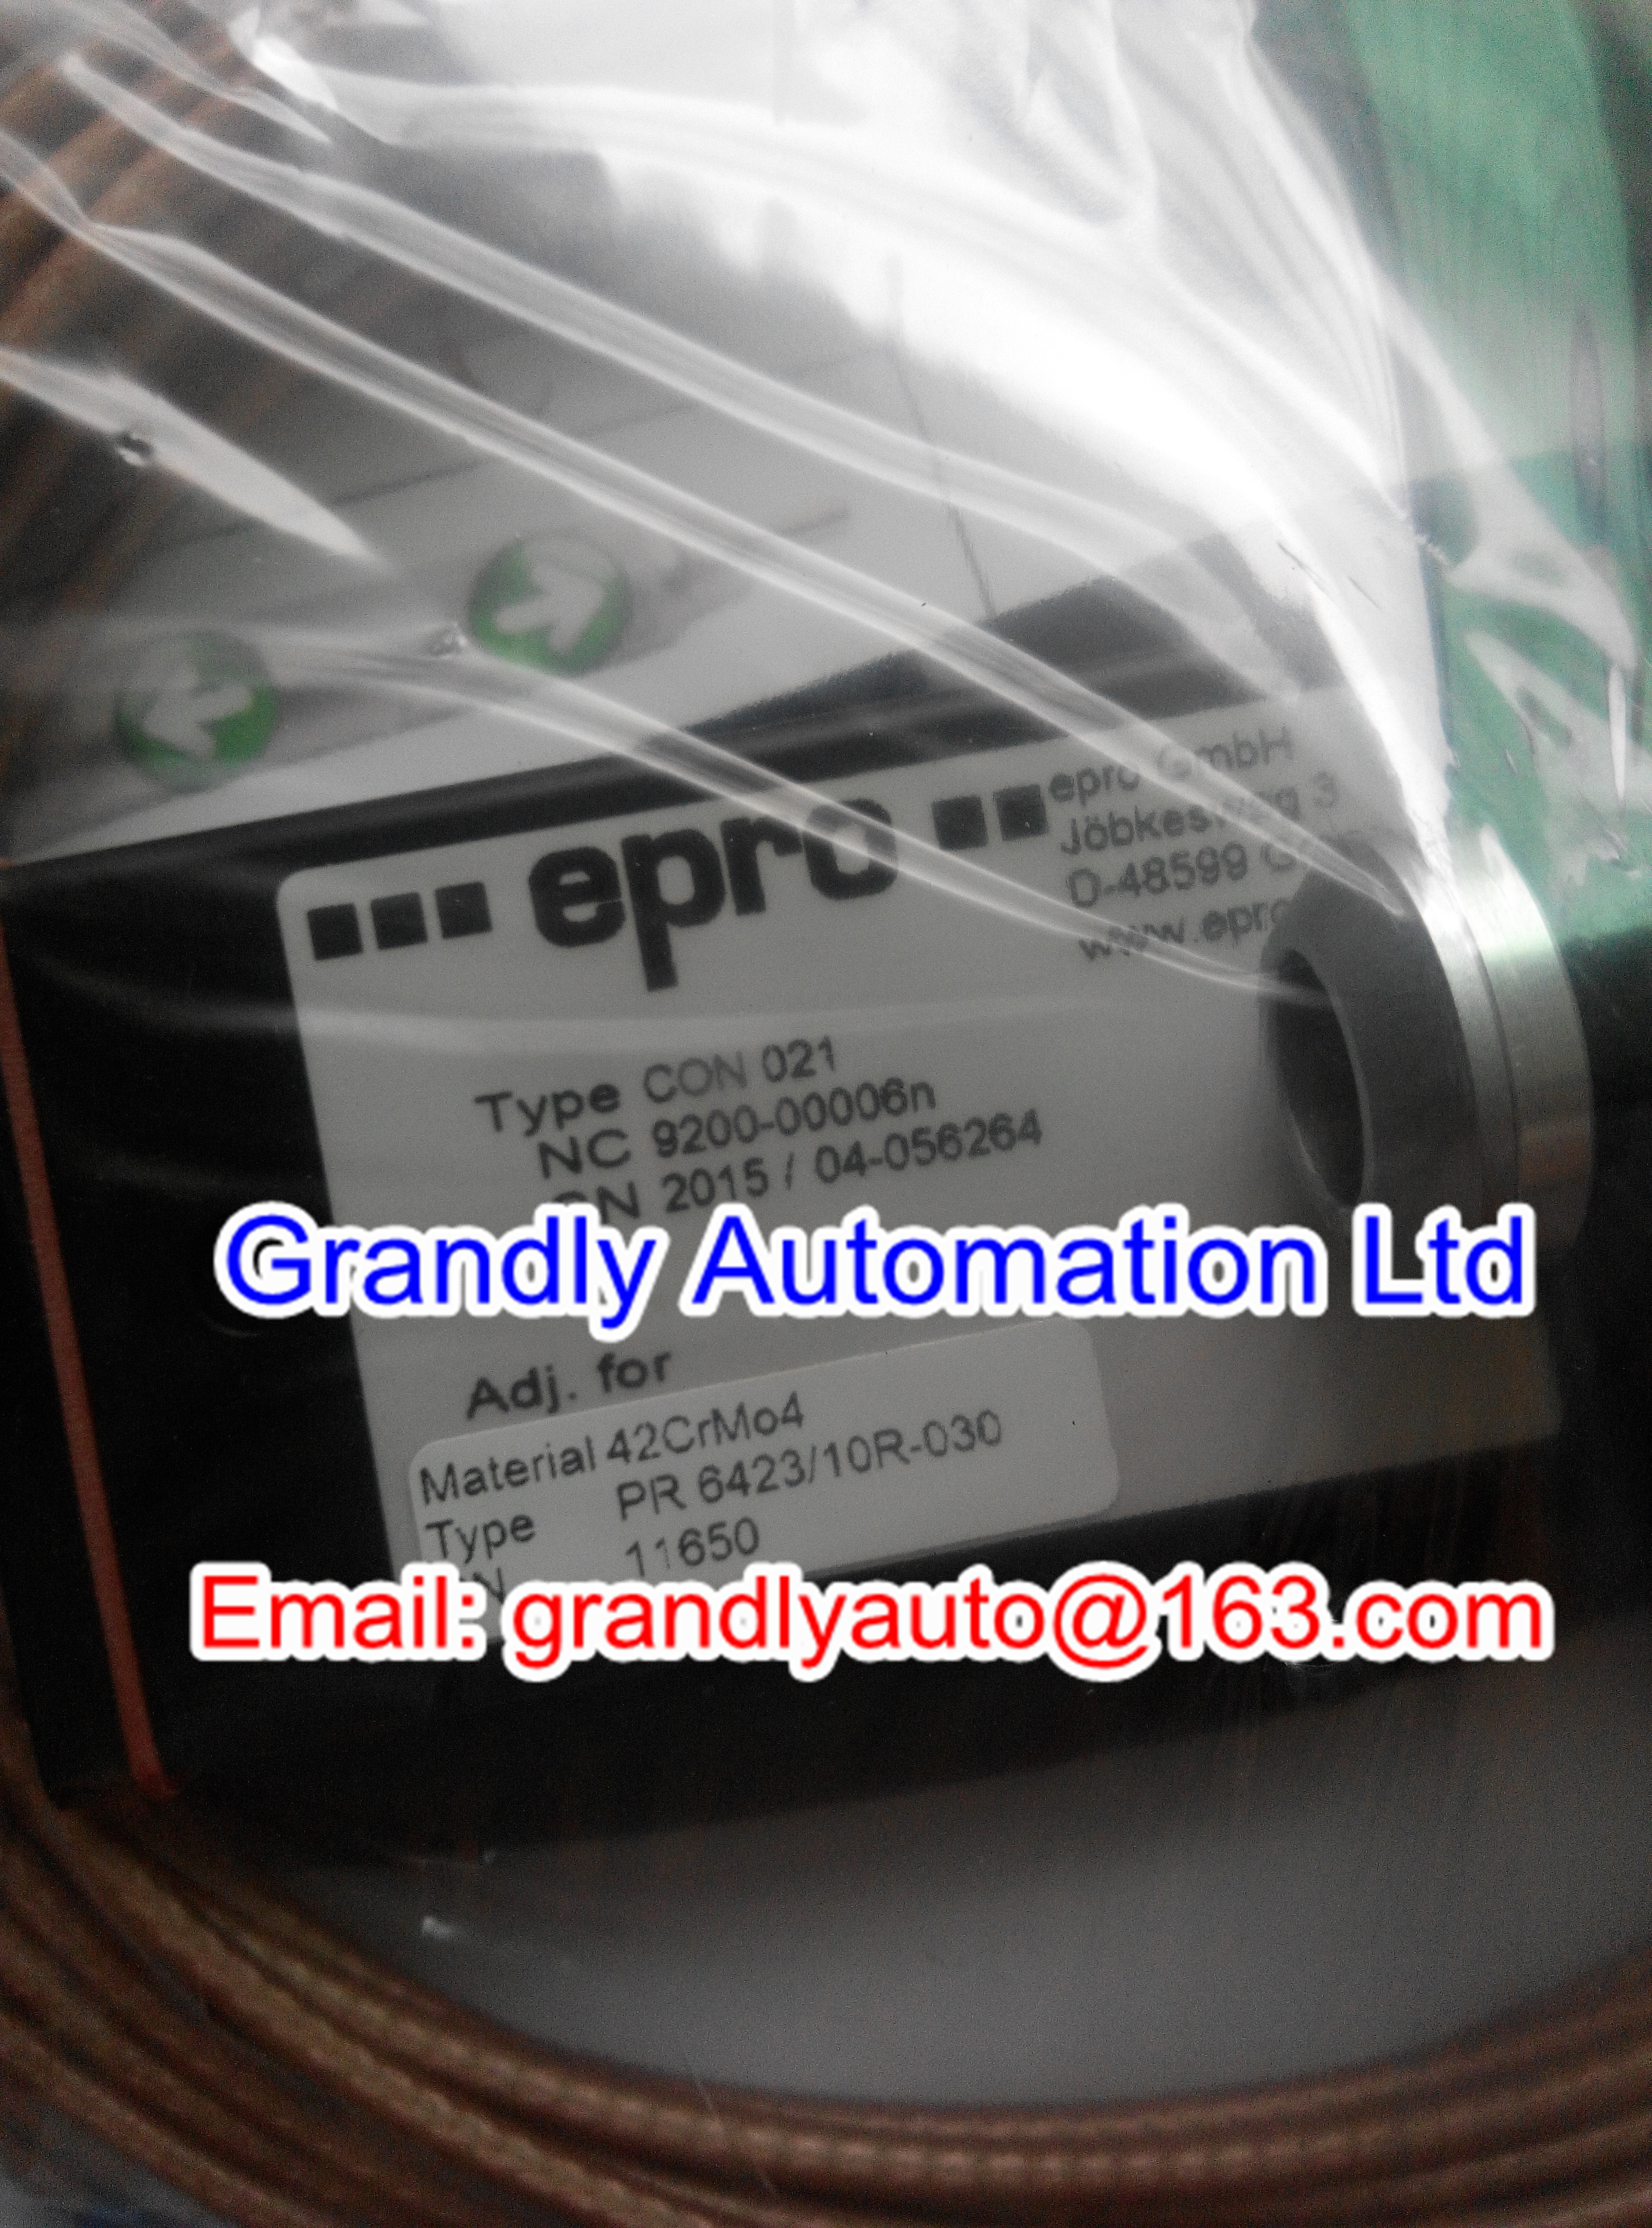 Quality New EPRO PR6423/010-000 Sensor in stock-Buy at Grandly Automation Ltd